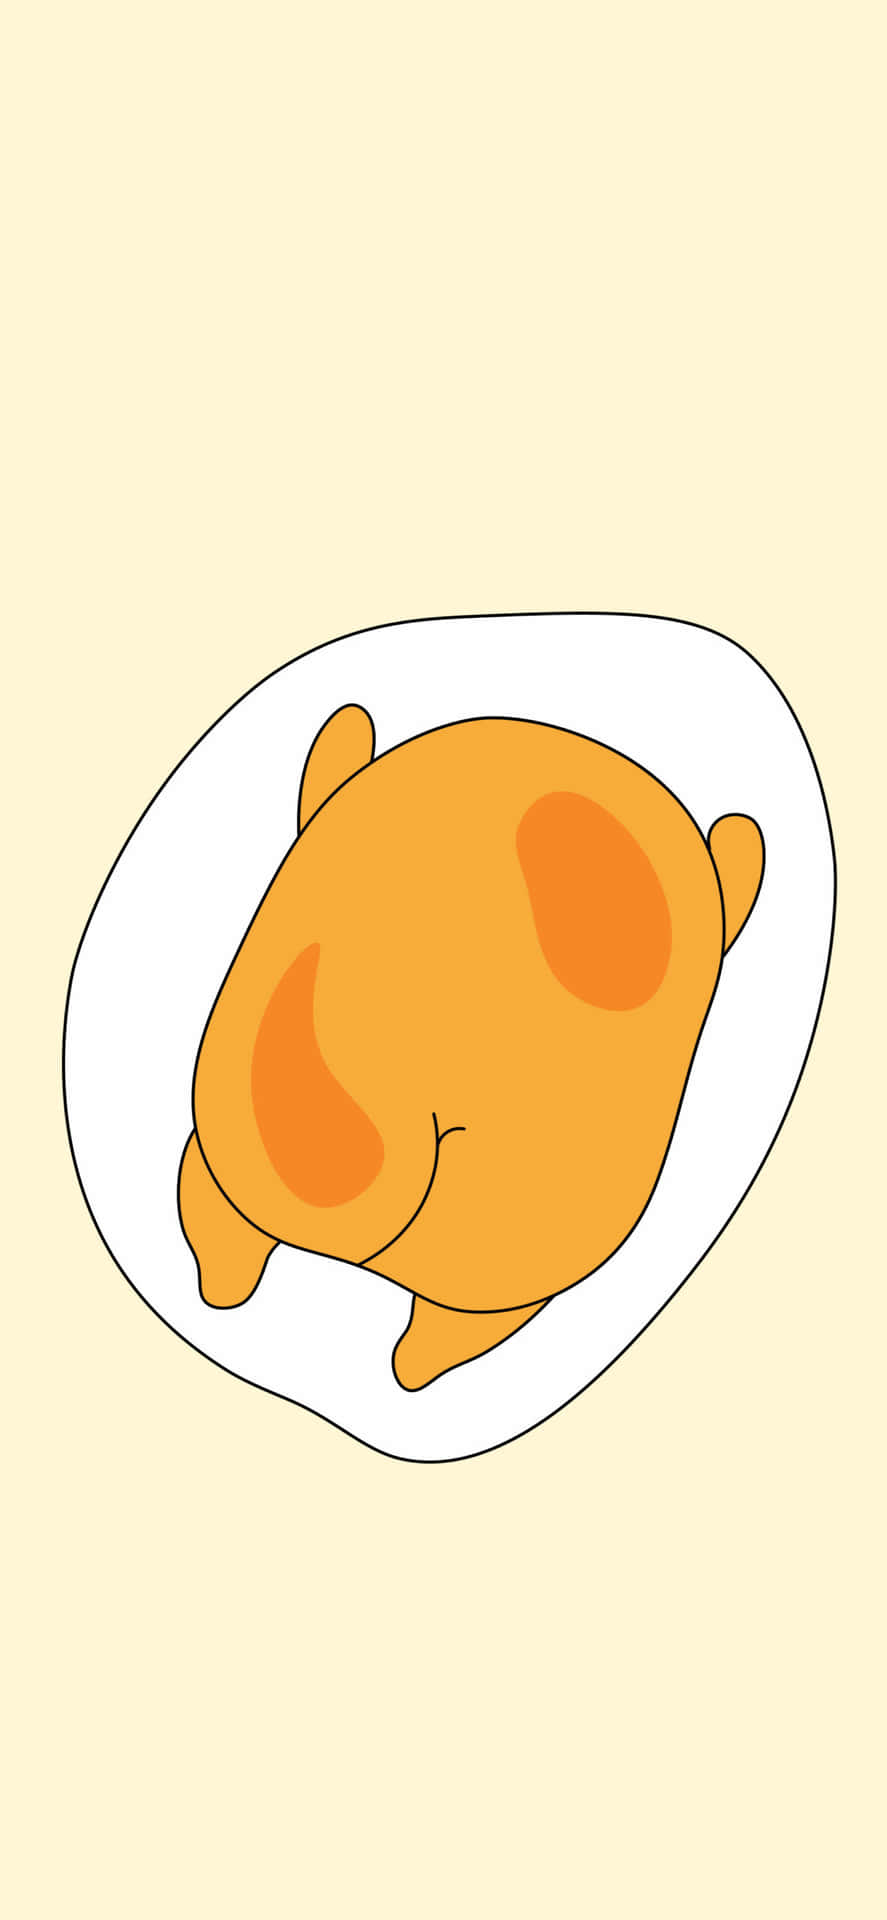 Experience the playful world of Gudetama through your phone Wallpaper